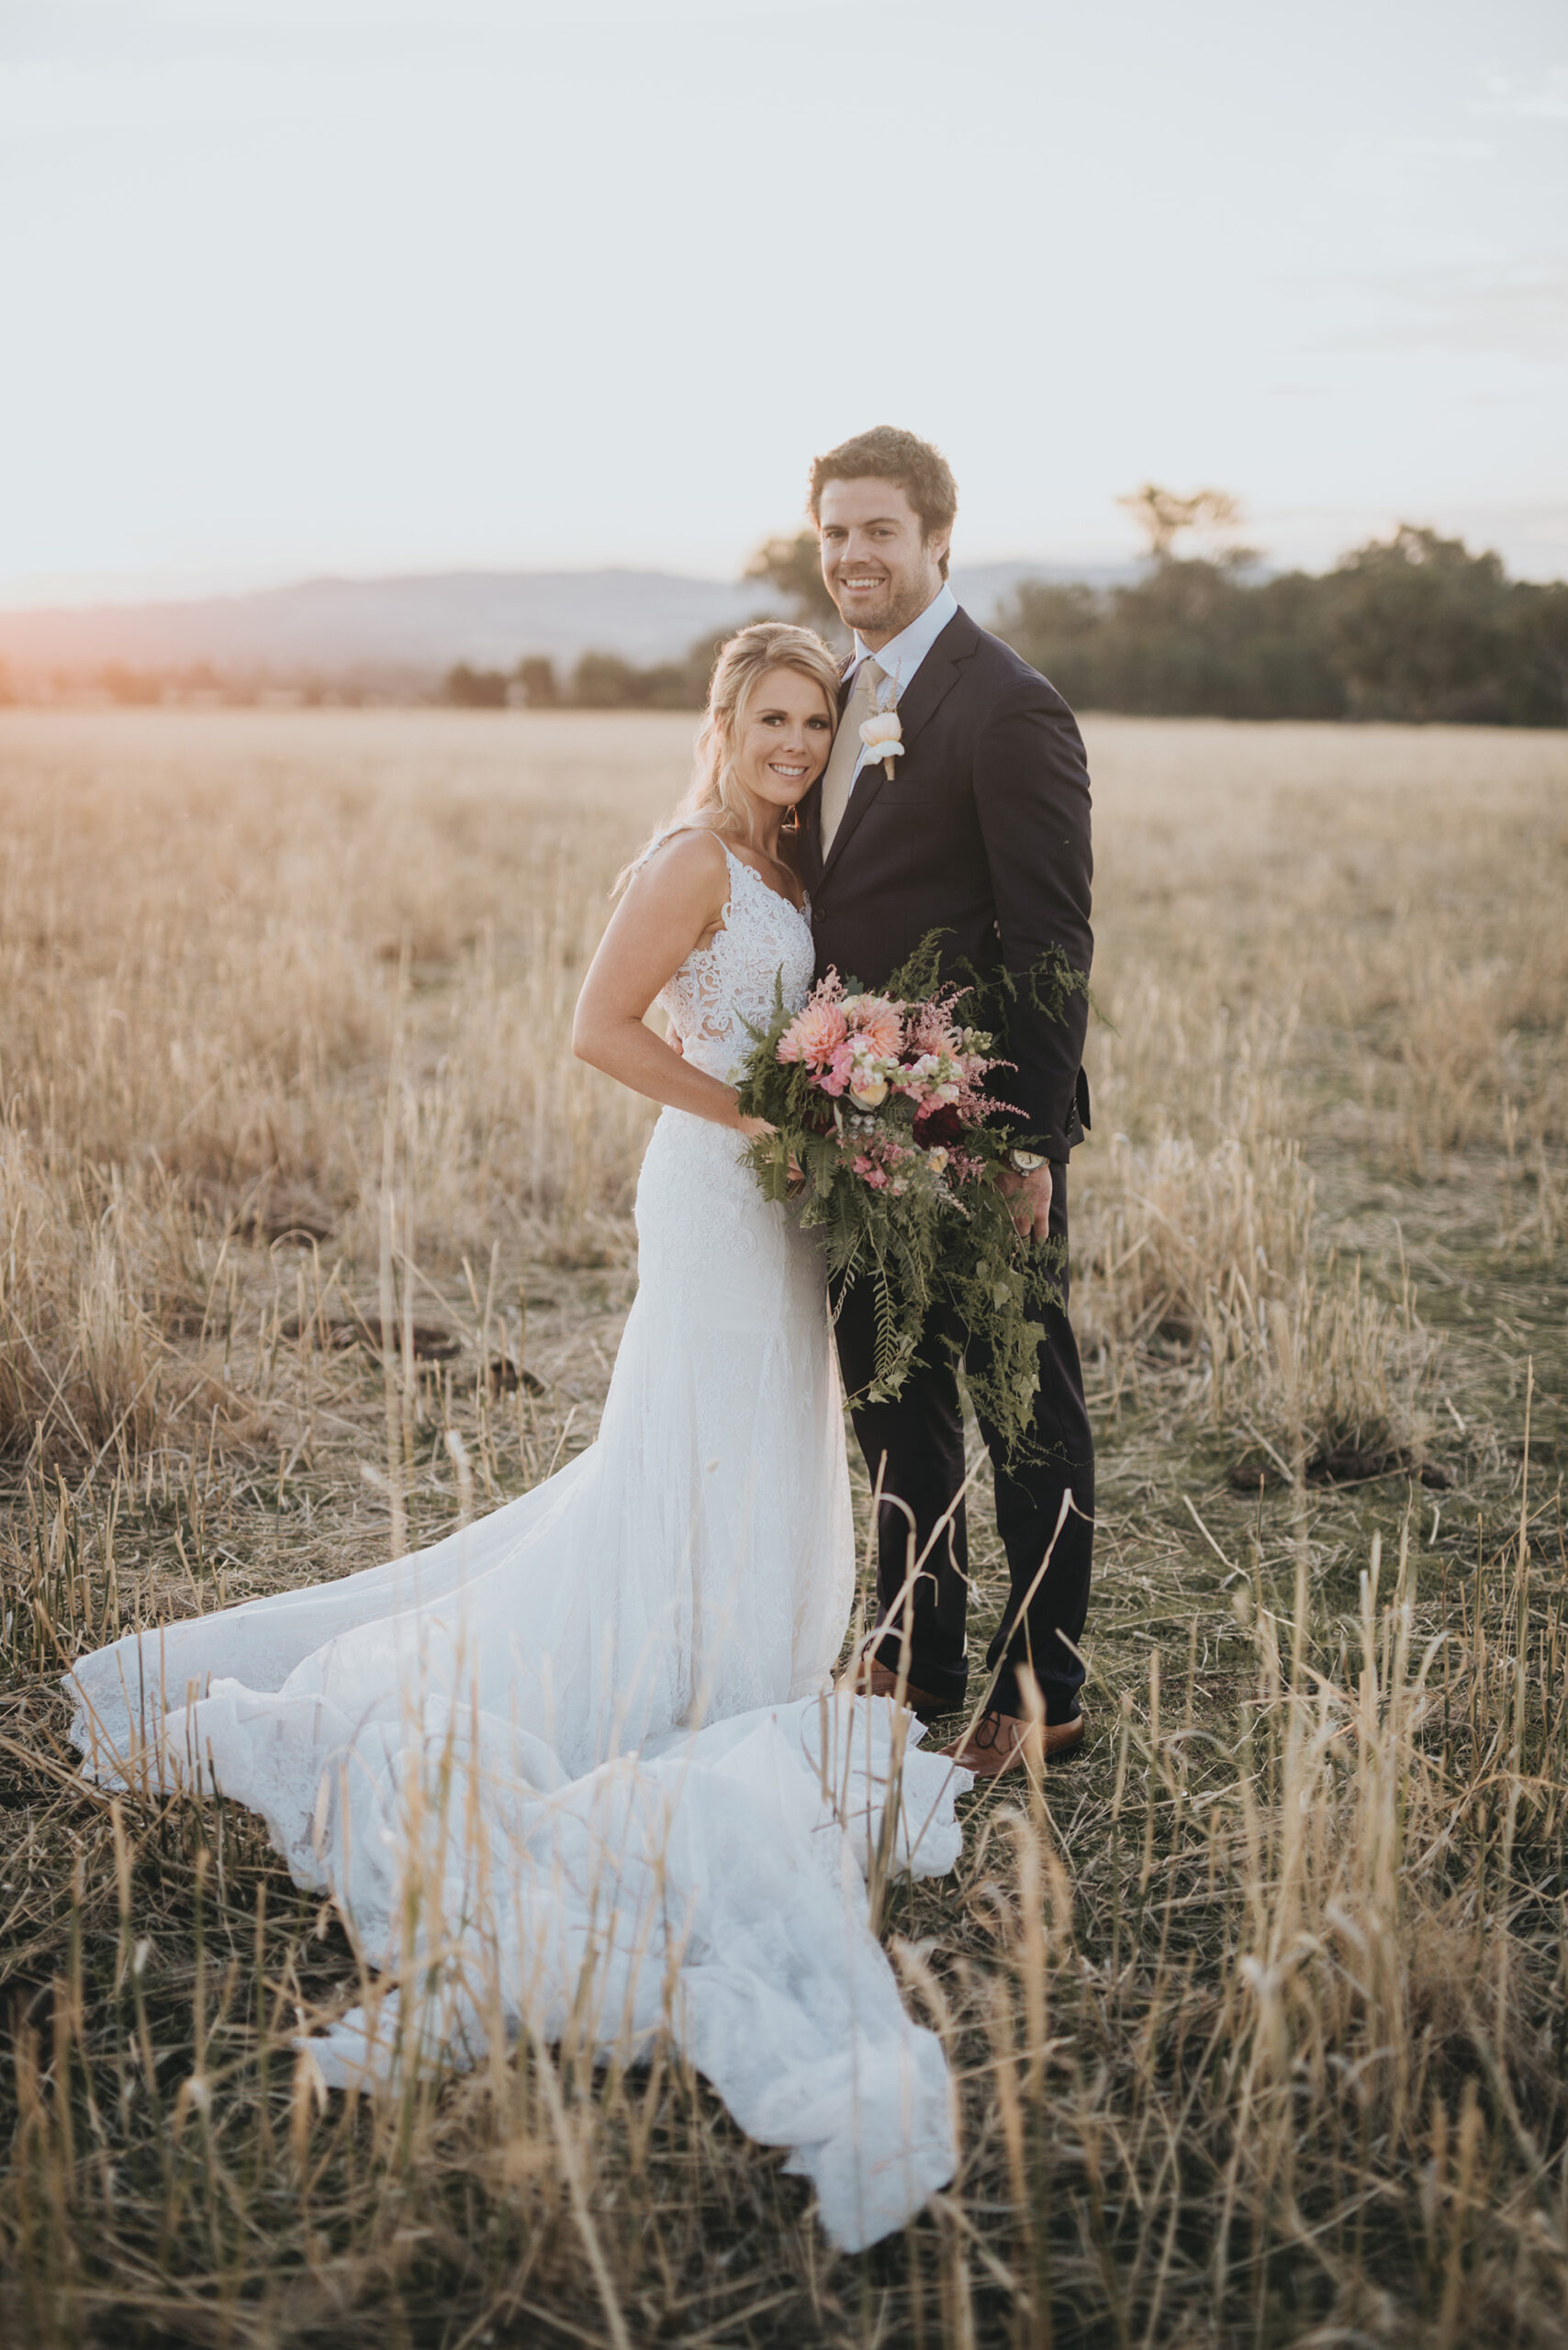 Kate_Tristan_Country-Rustic-Wedding_048